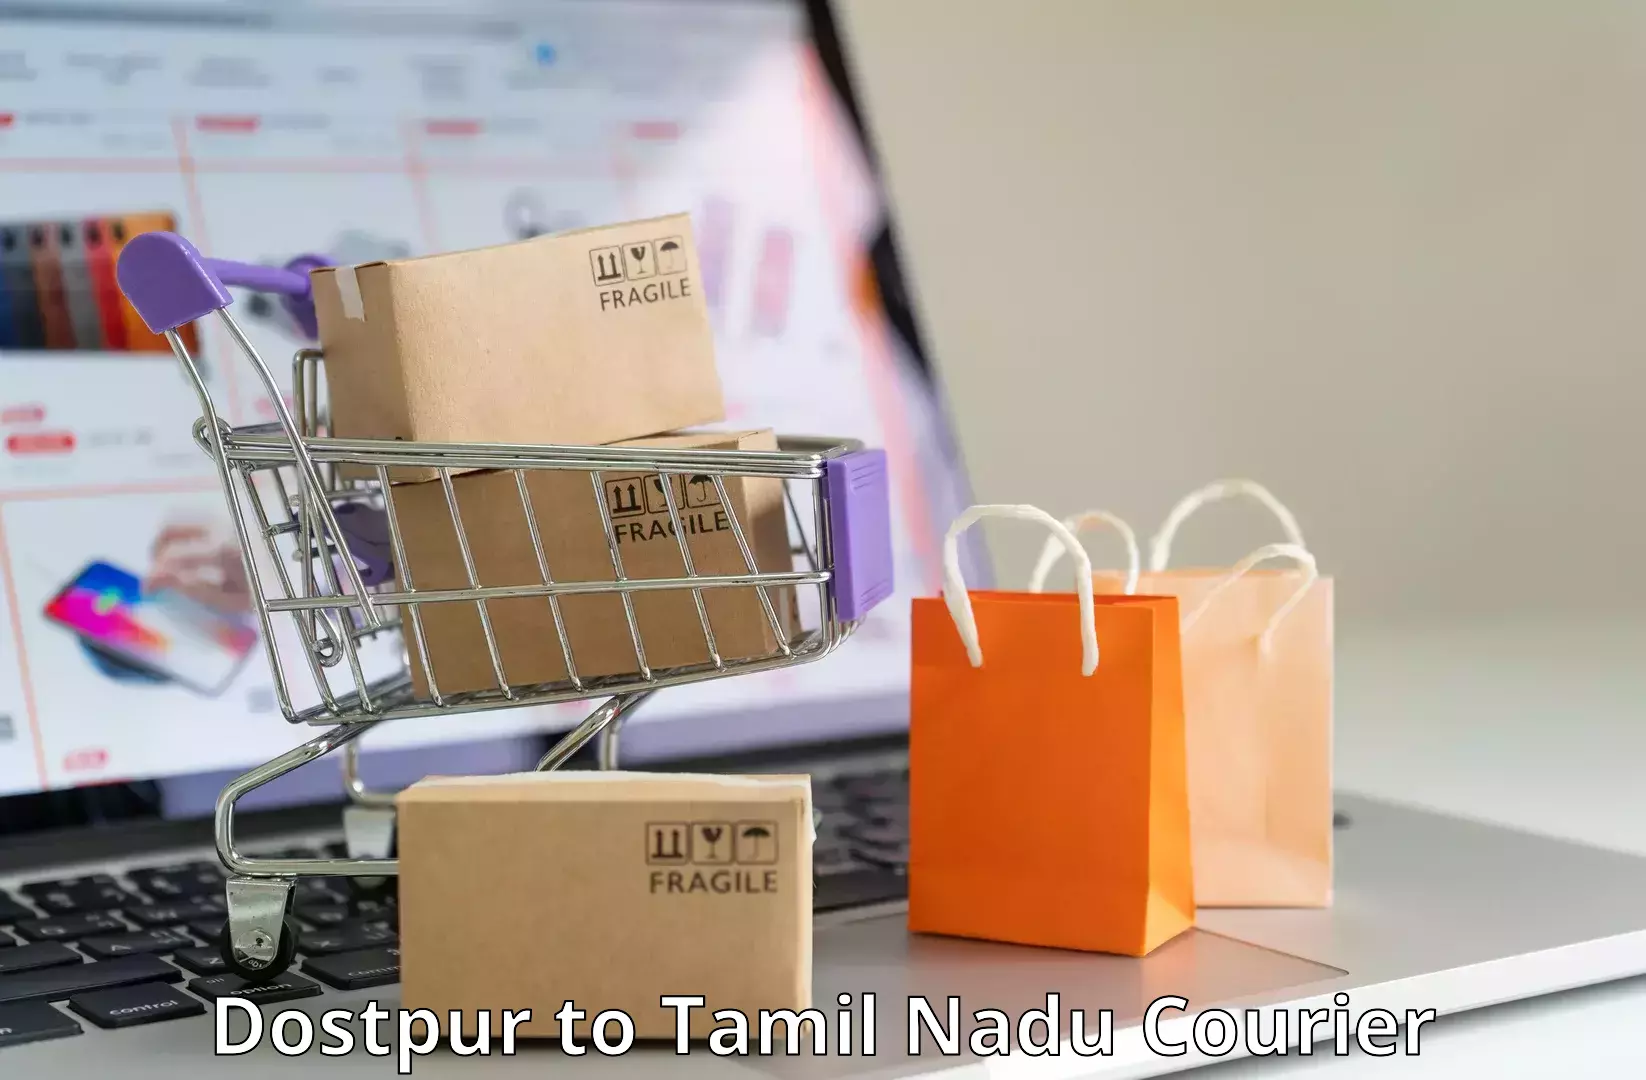 Local courier options Dostpur to Tamil Nadu